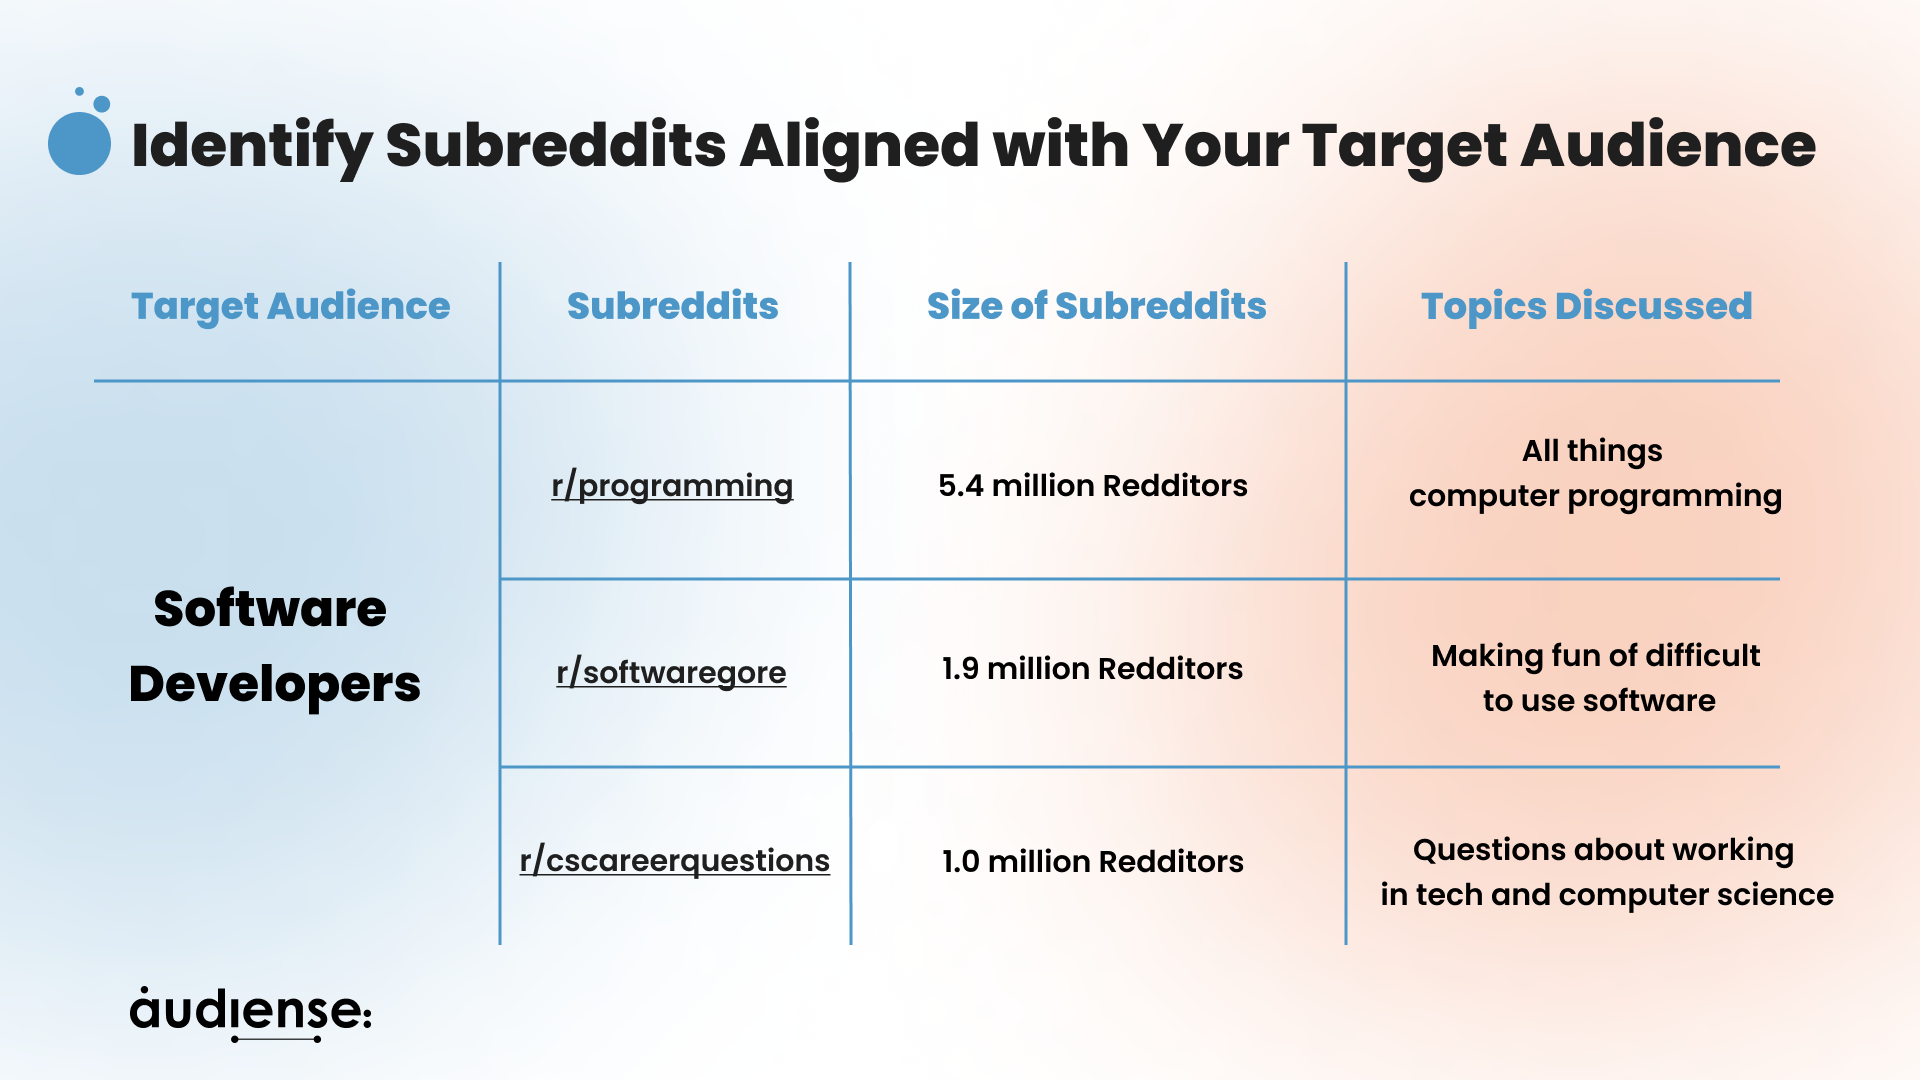 Audiense blog - Identify subreddits aligned with your target audience